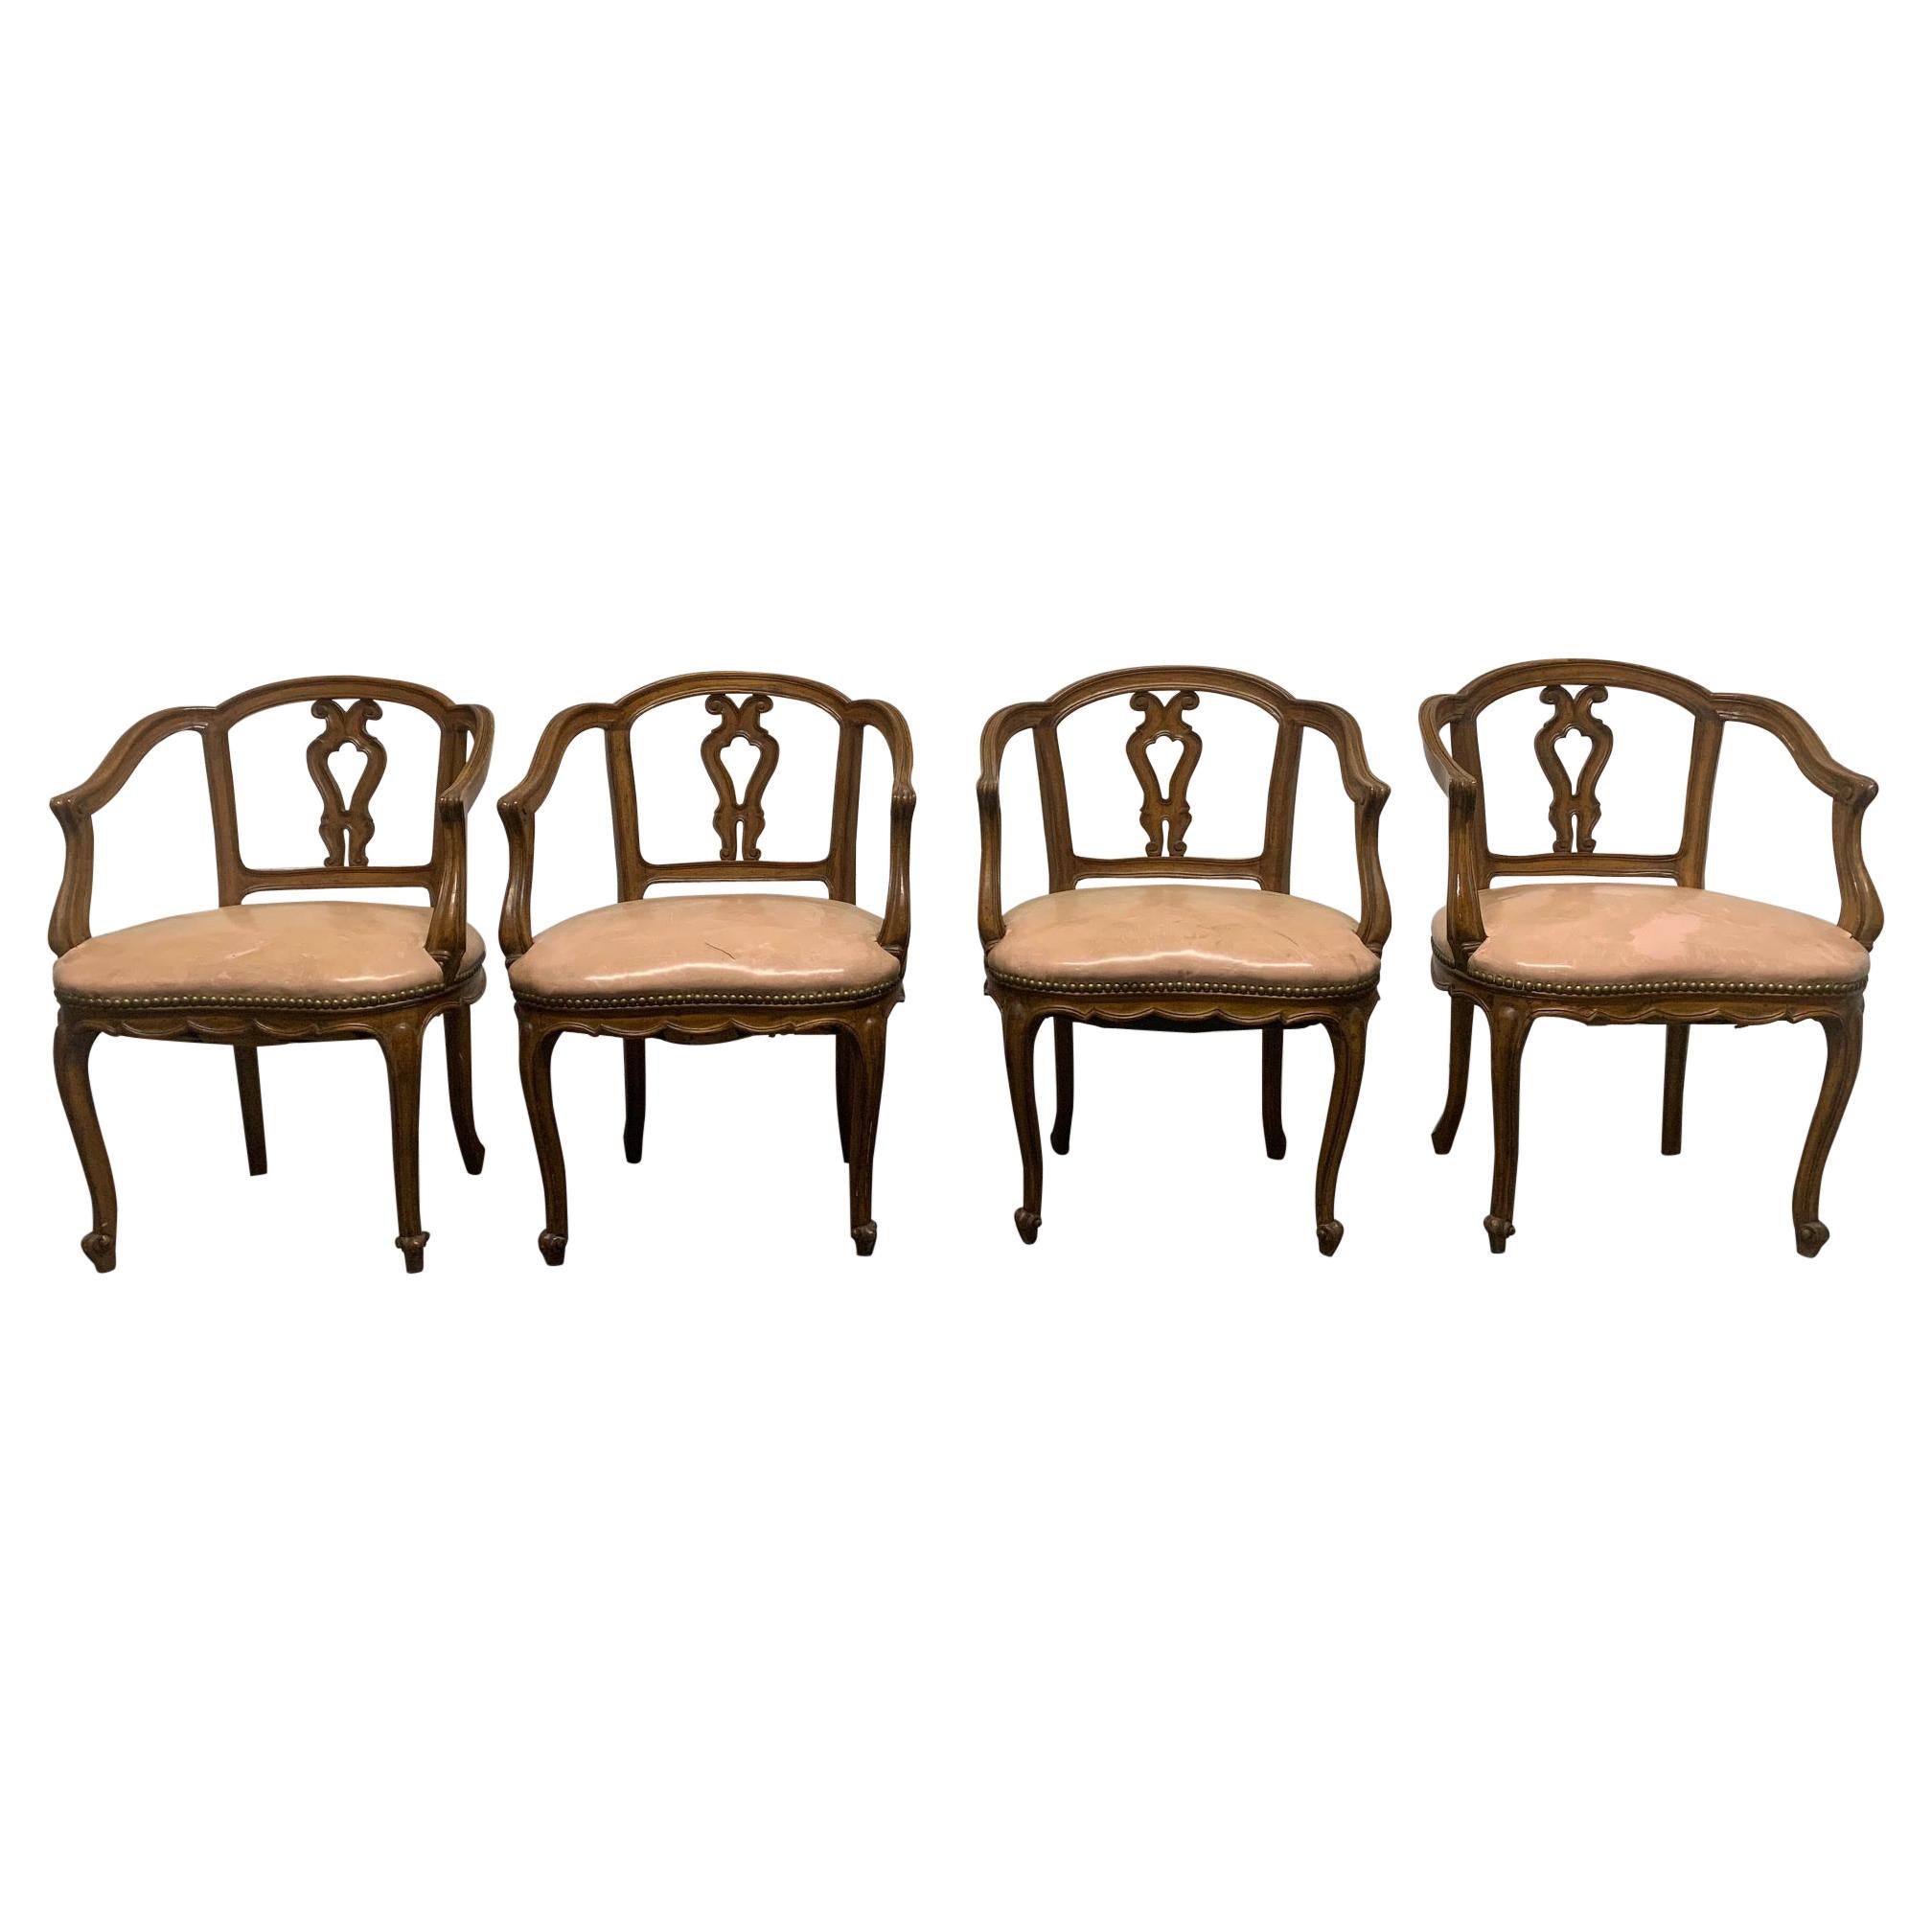 Set of Four Antique Walnut Dining Chairs